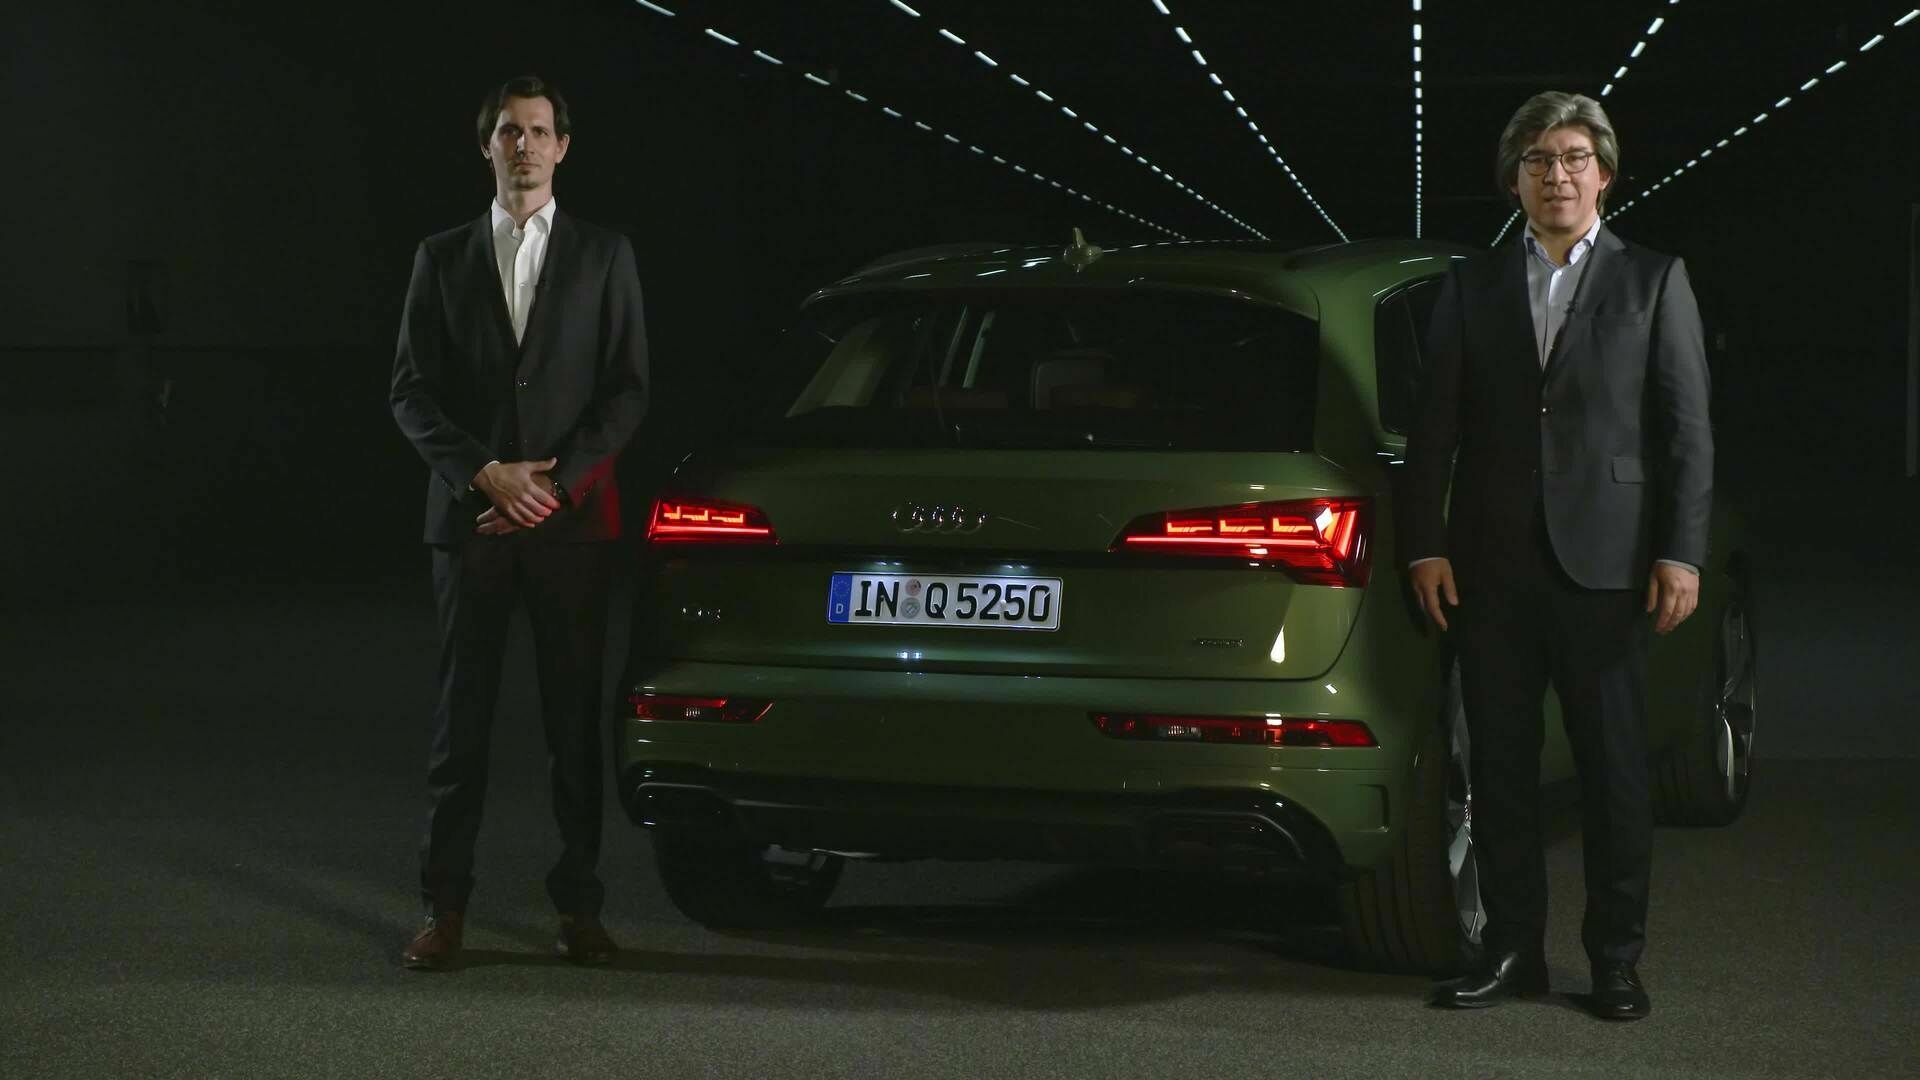 The digital OLED technology in the rear lights of the Audi Q5